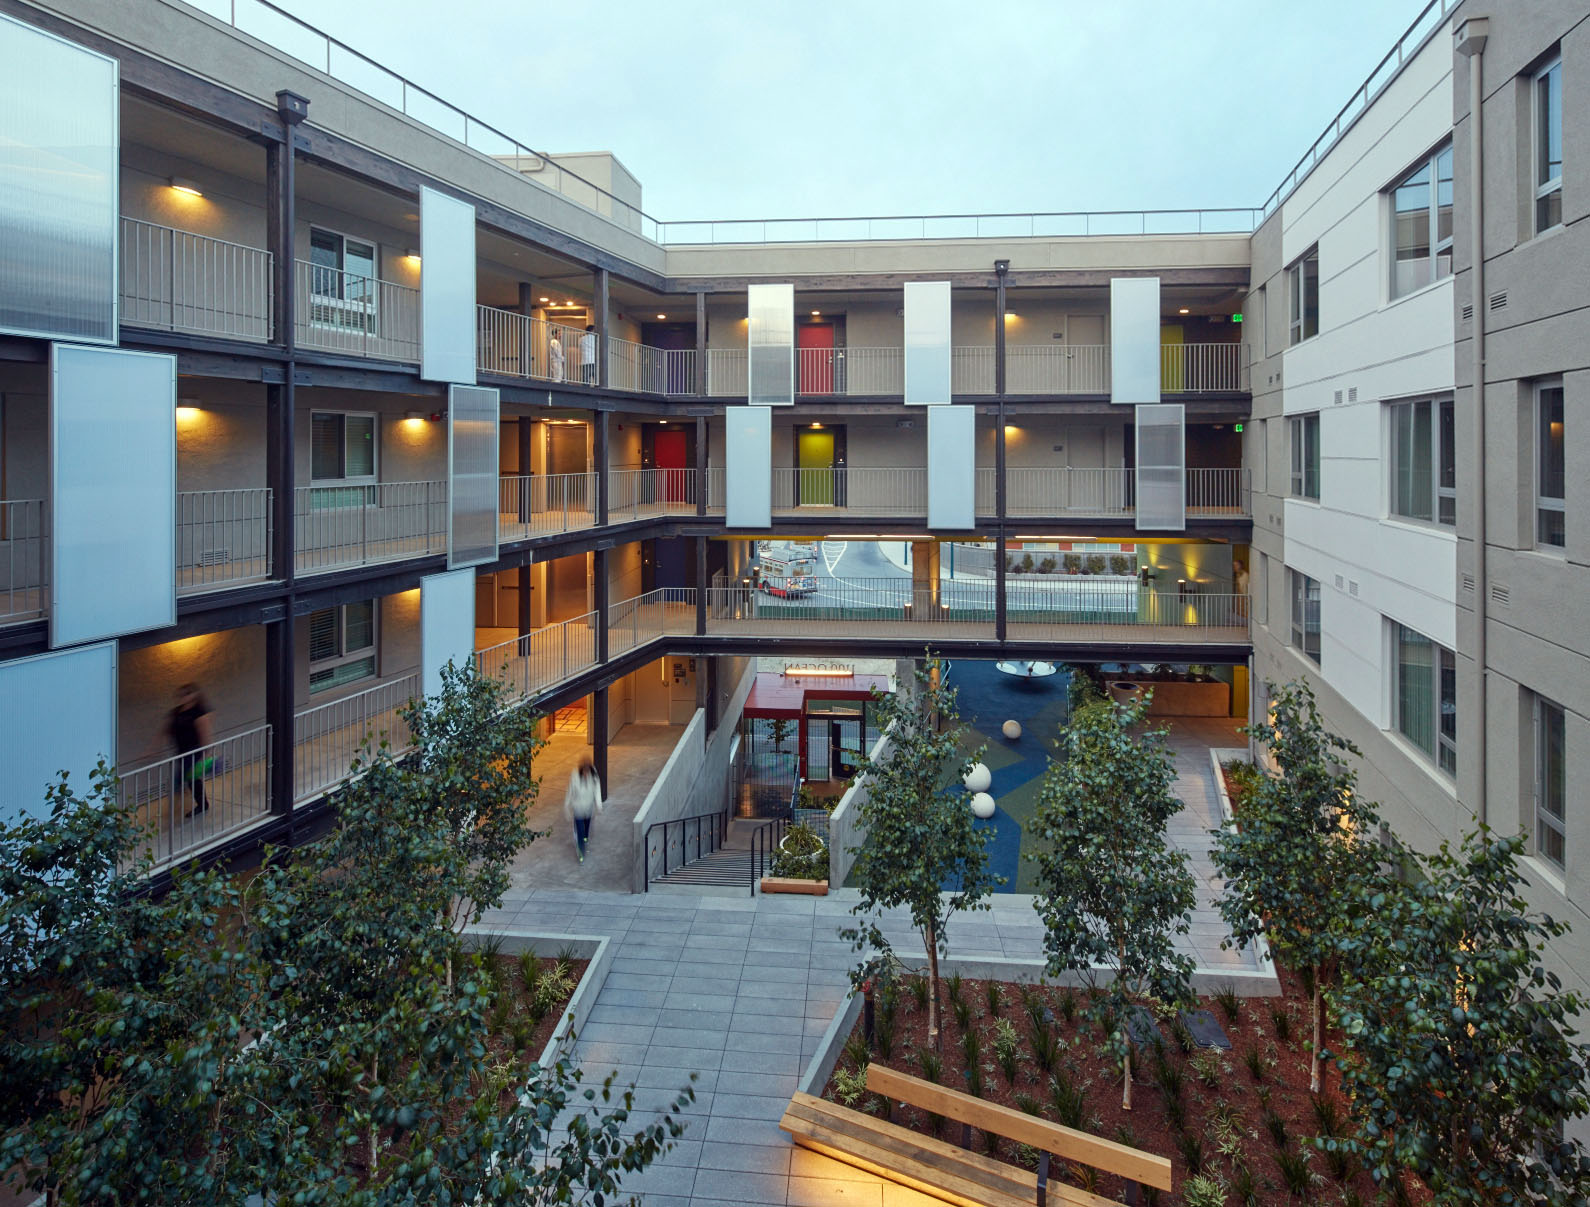 Photograph of a landscaped courtyard, surrounded by walkways and residential units.